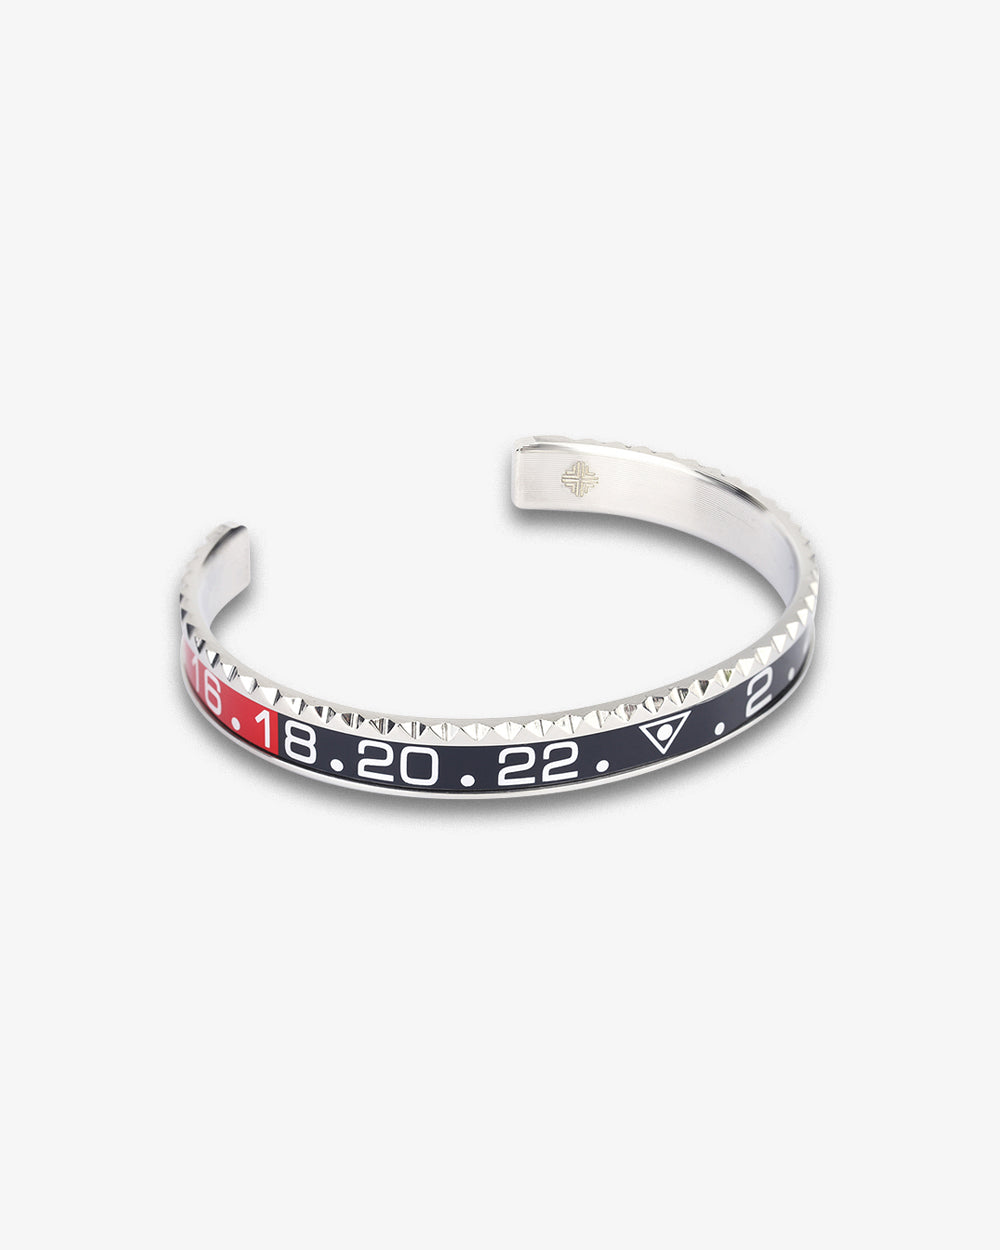 Swiss Concept Classic Dual Time GMT II 'Coke' Speed Bracelet (Stainless Steel) - Polished Finish